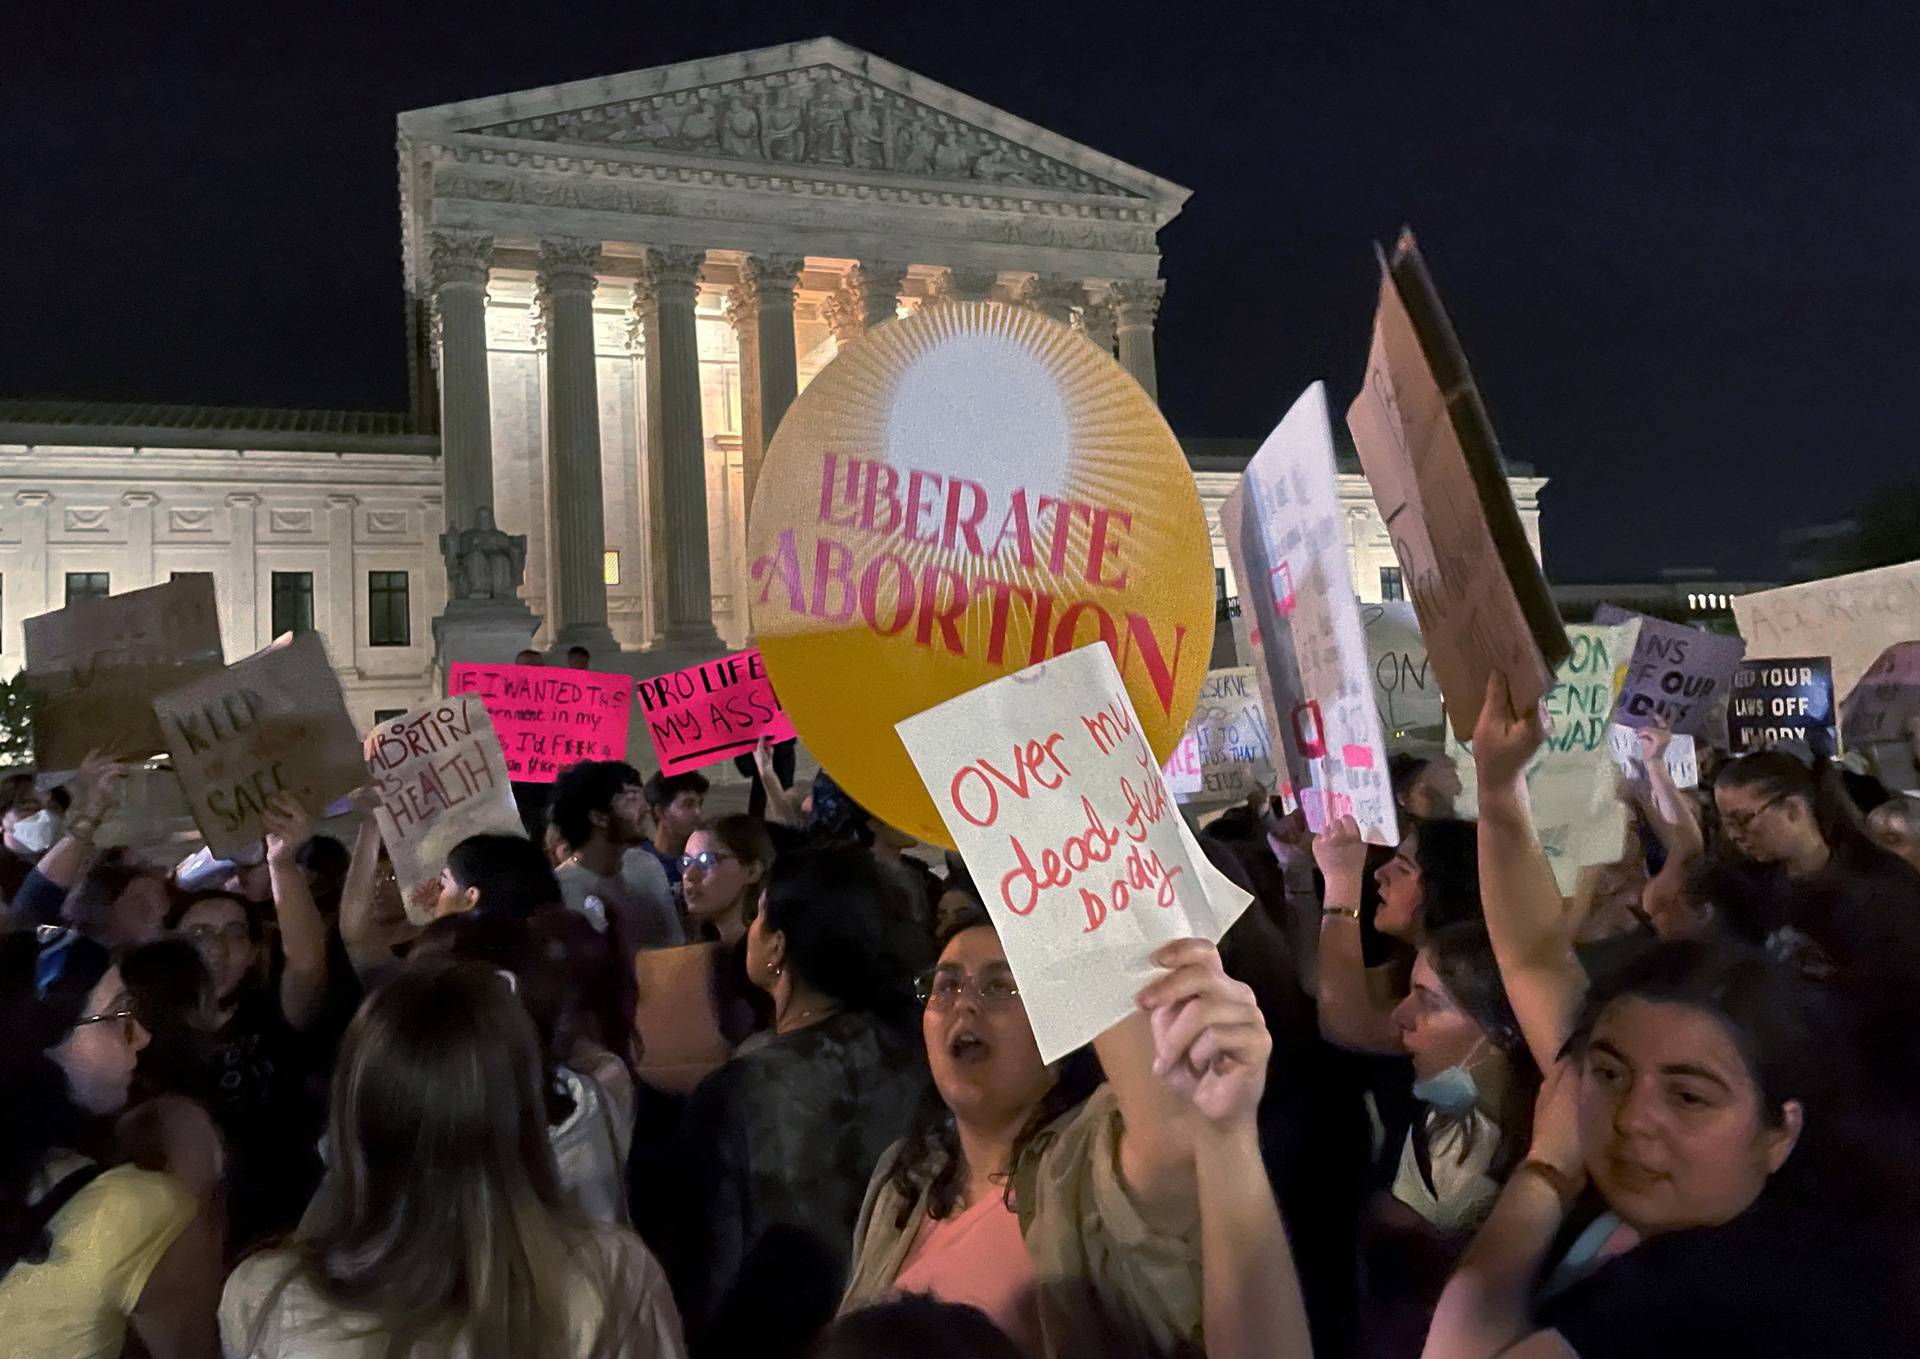 Protestors react outside the U.S. Supreme Court after the leak of a draft opinion preparing for a majority of the court to overturn the Roe v. Wade abortion rights decision in Washington